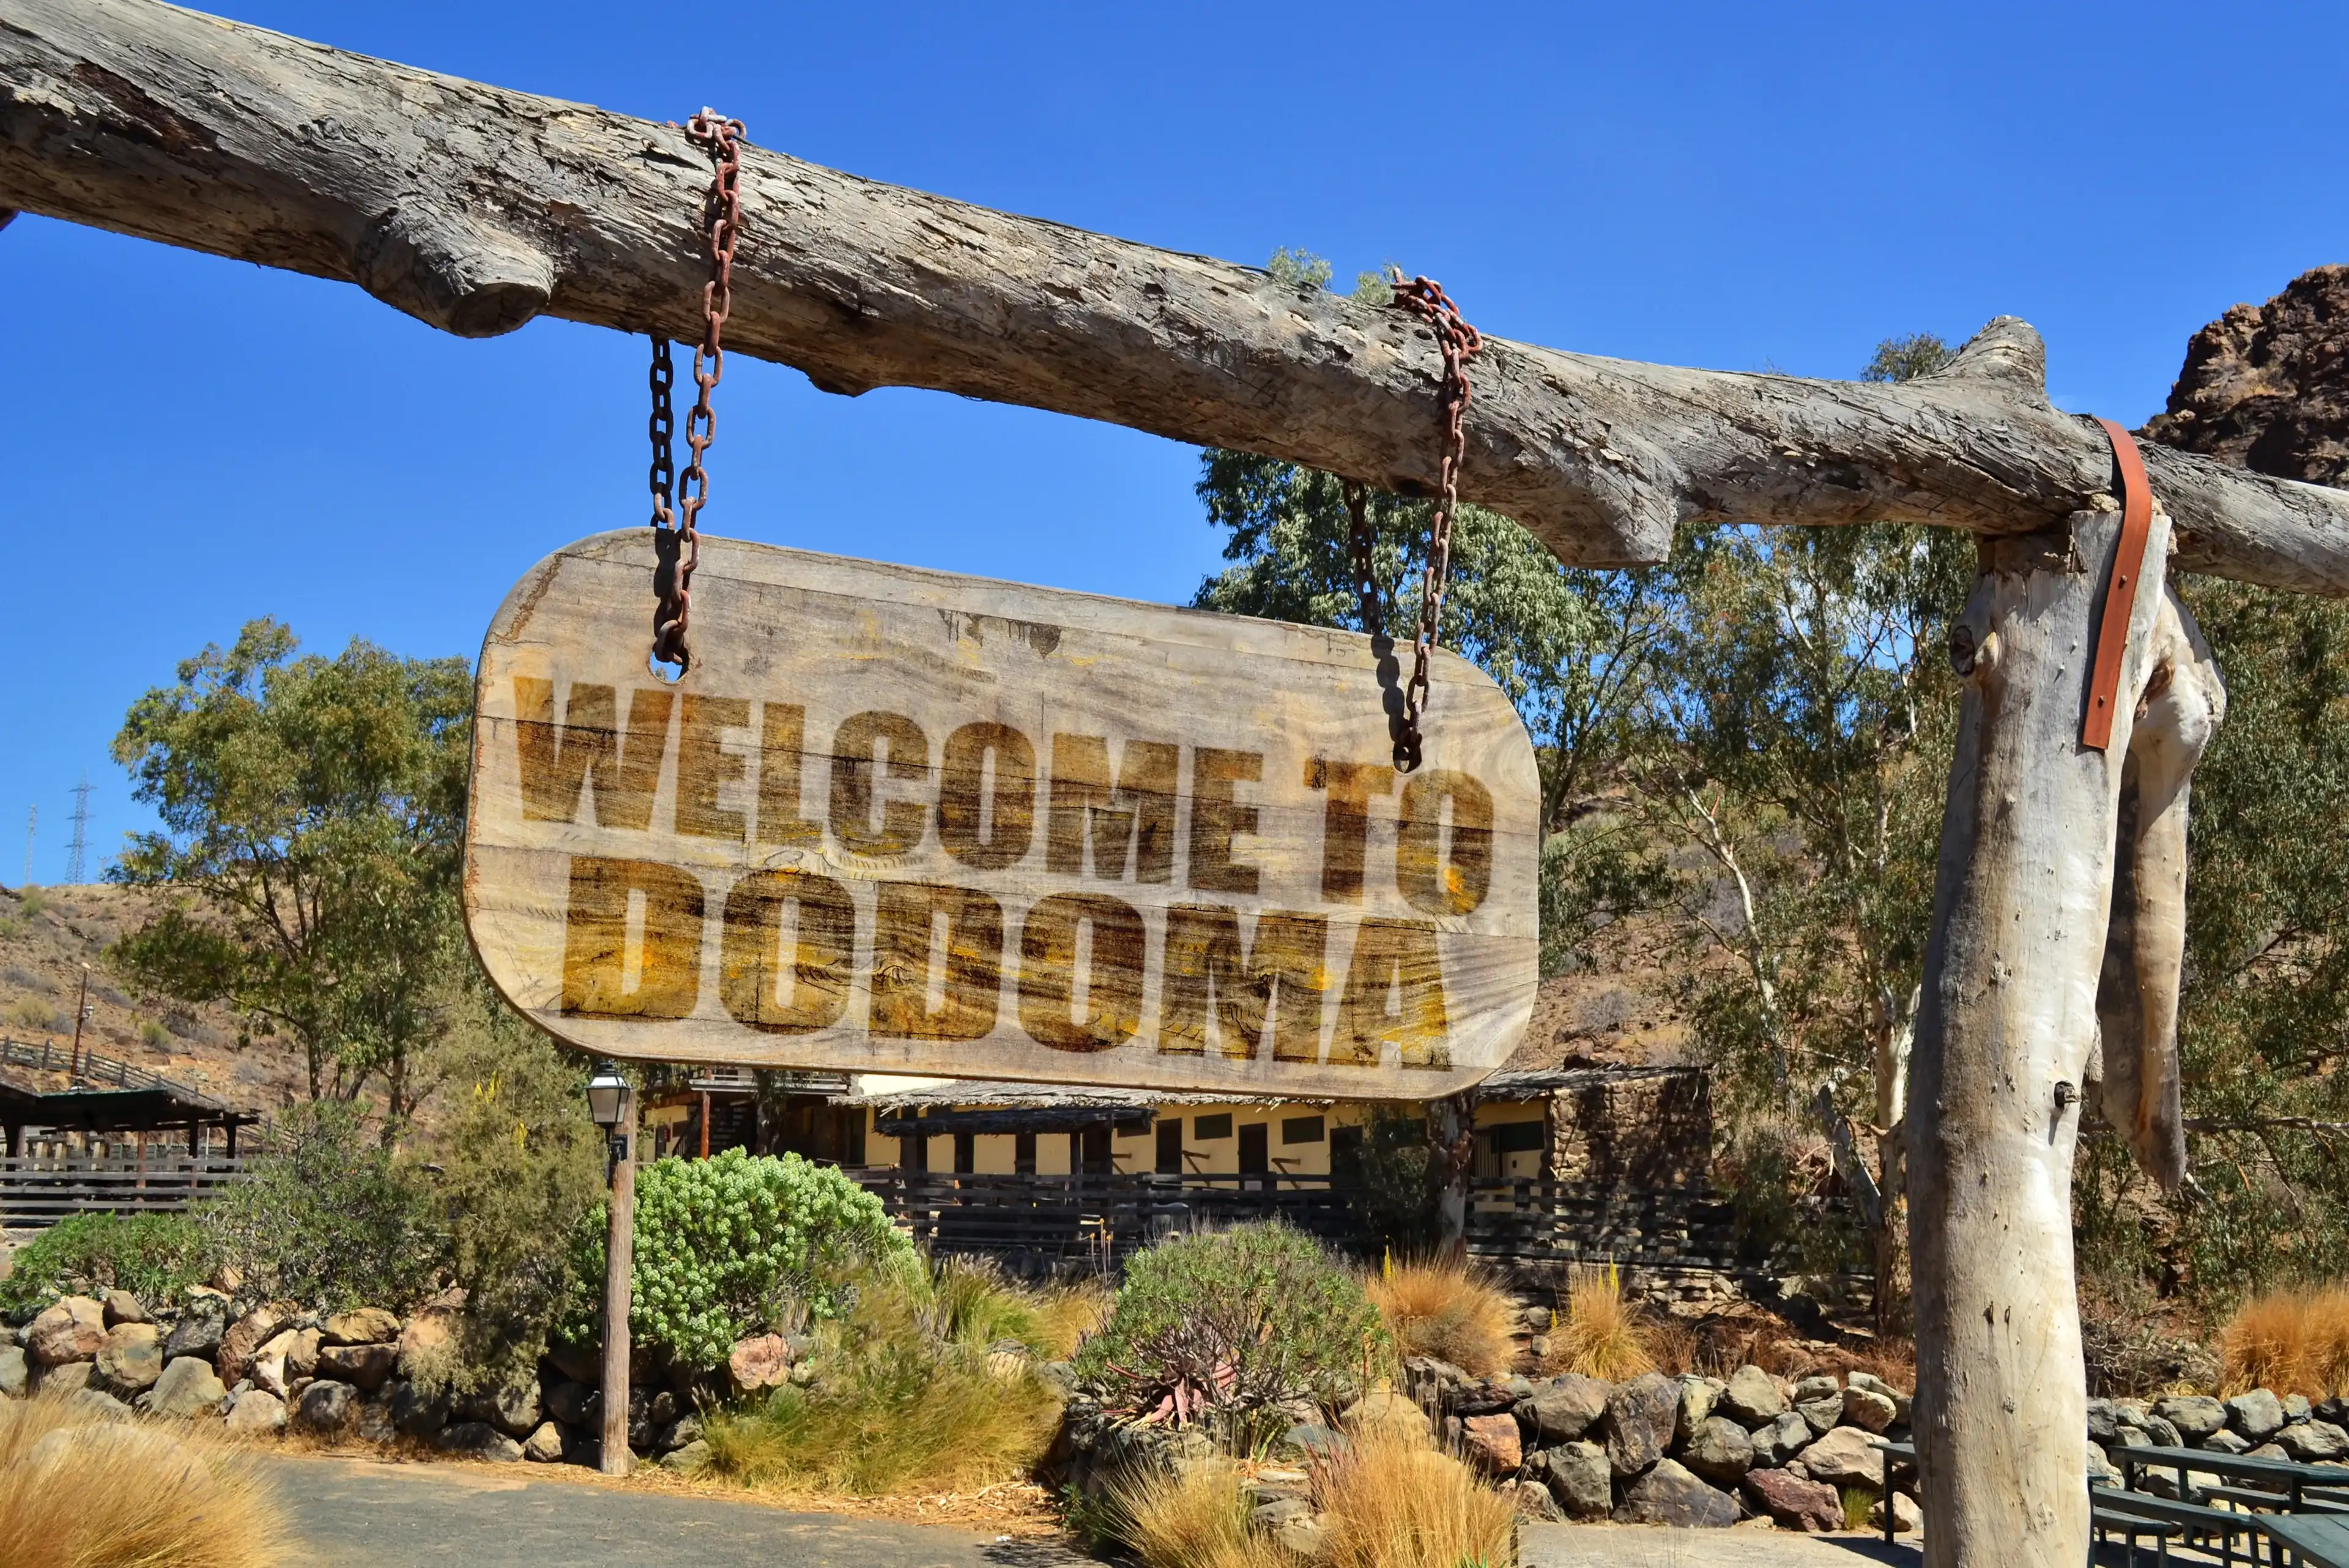 old vintage wood signboard with text " welcome to Dodoma" hanging on a branch